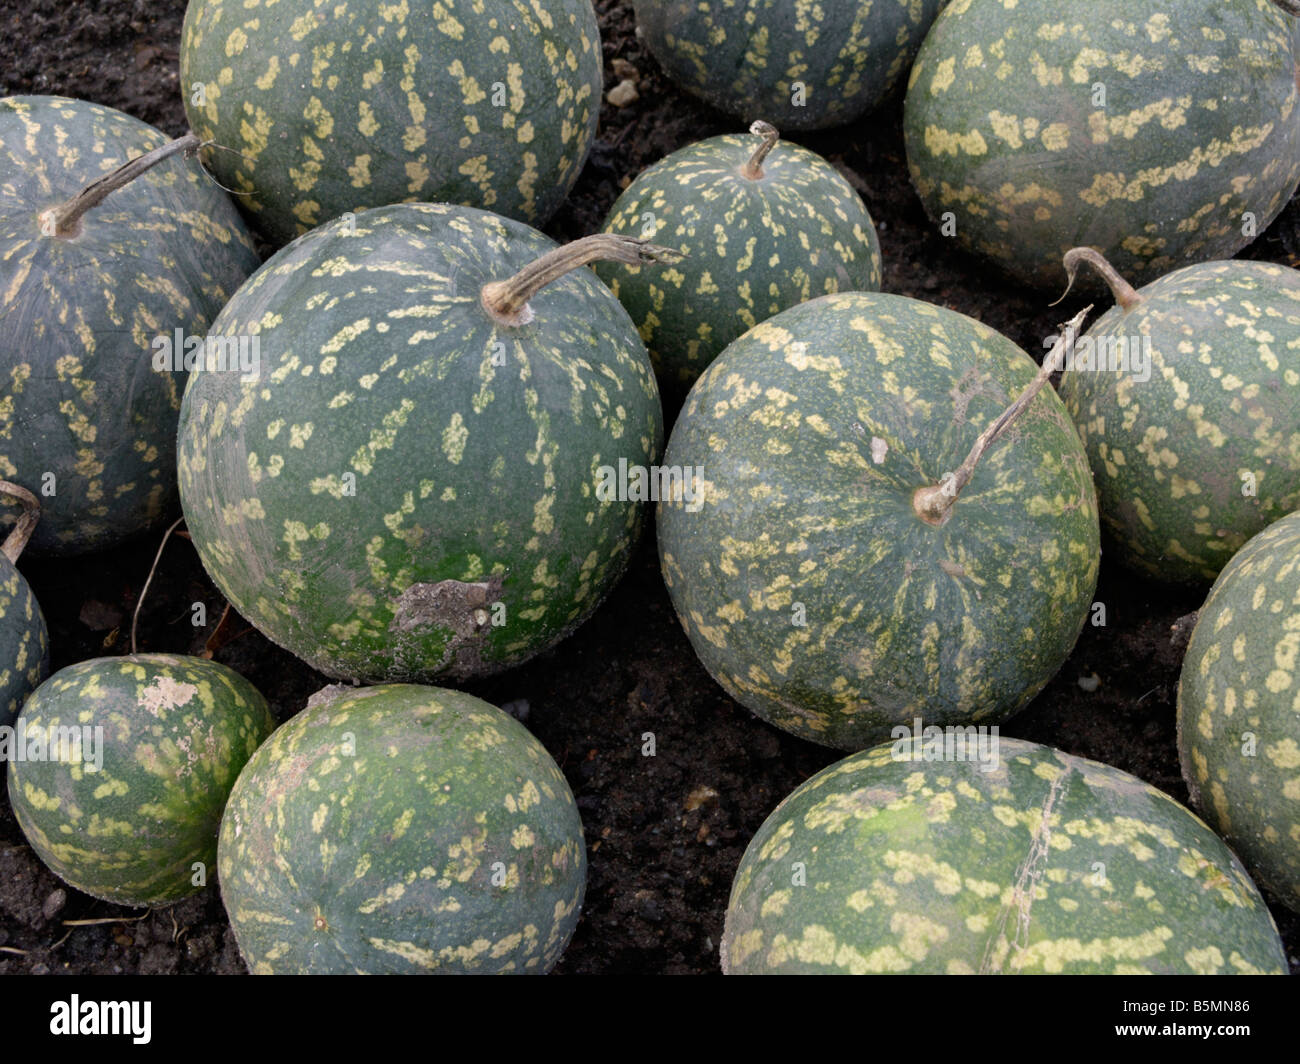 Colocynth (Citrullus colocynthis) Stock Photo